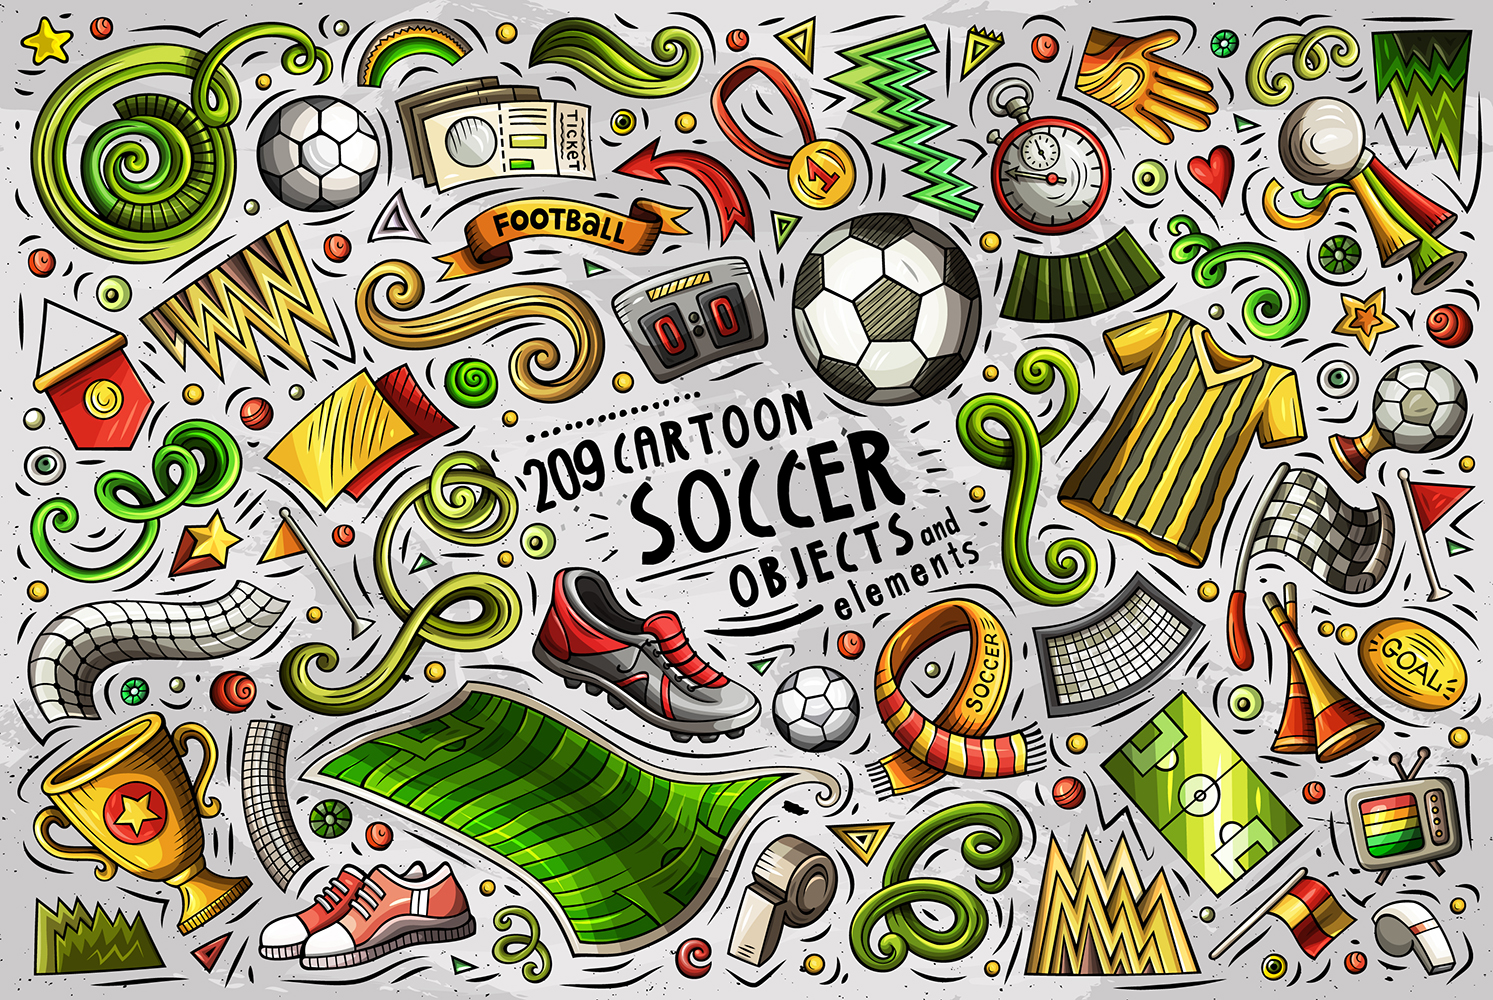 Soccer Cartoon Doodle Objects Set - Vector Image